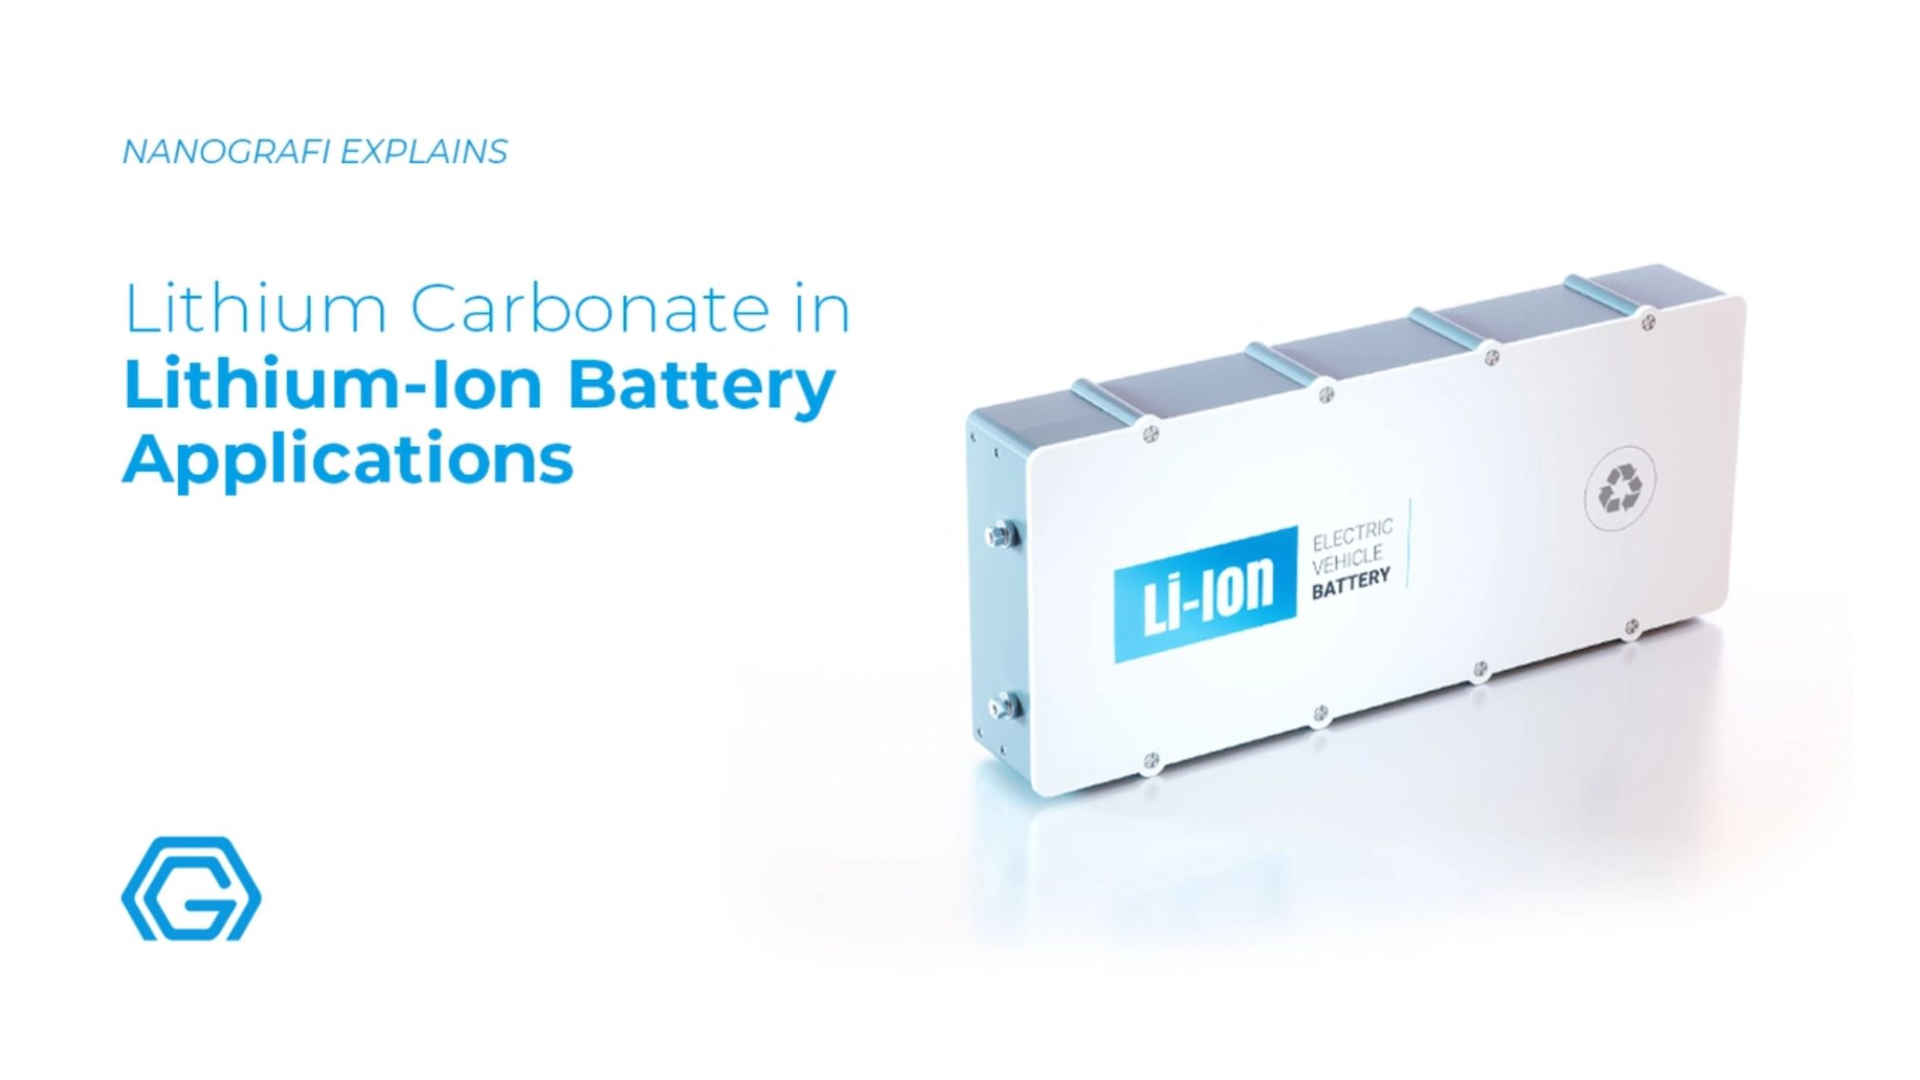 Lithium carbonate in lithium-ion battery applications